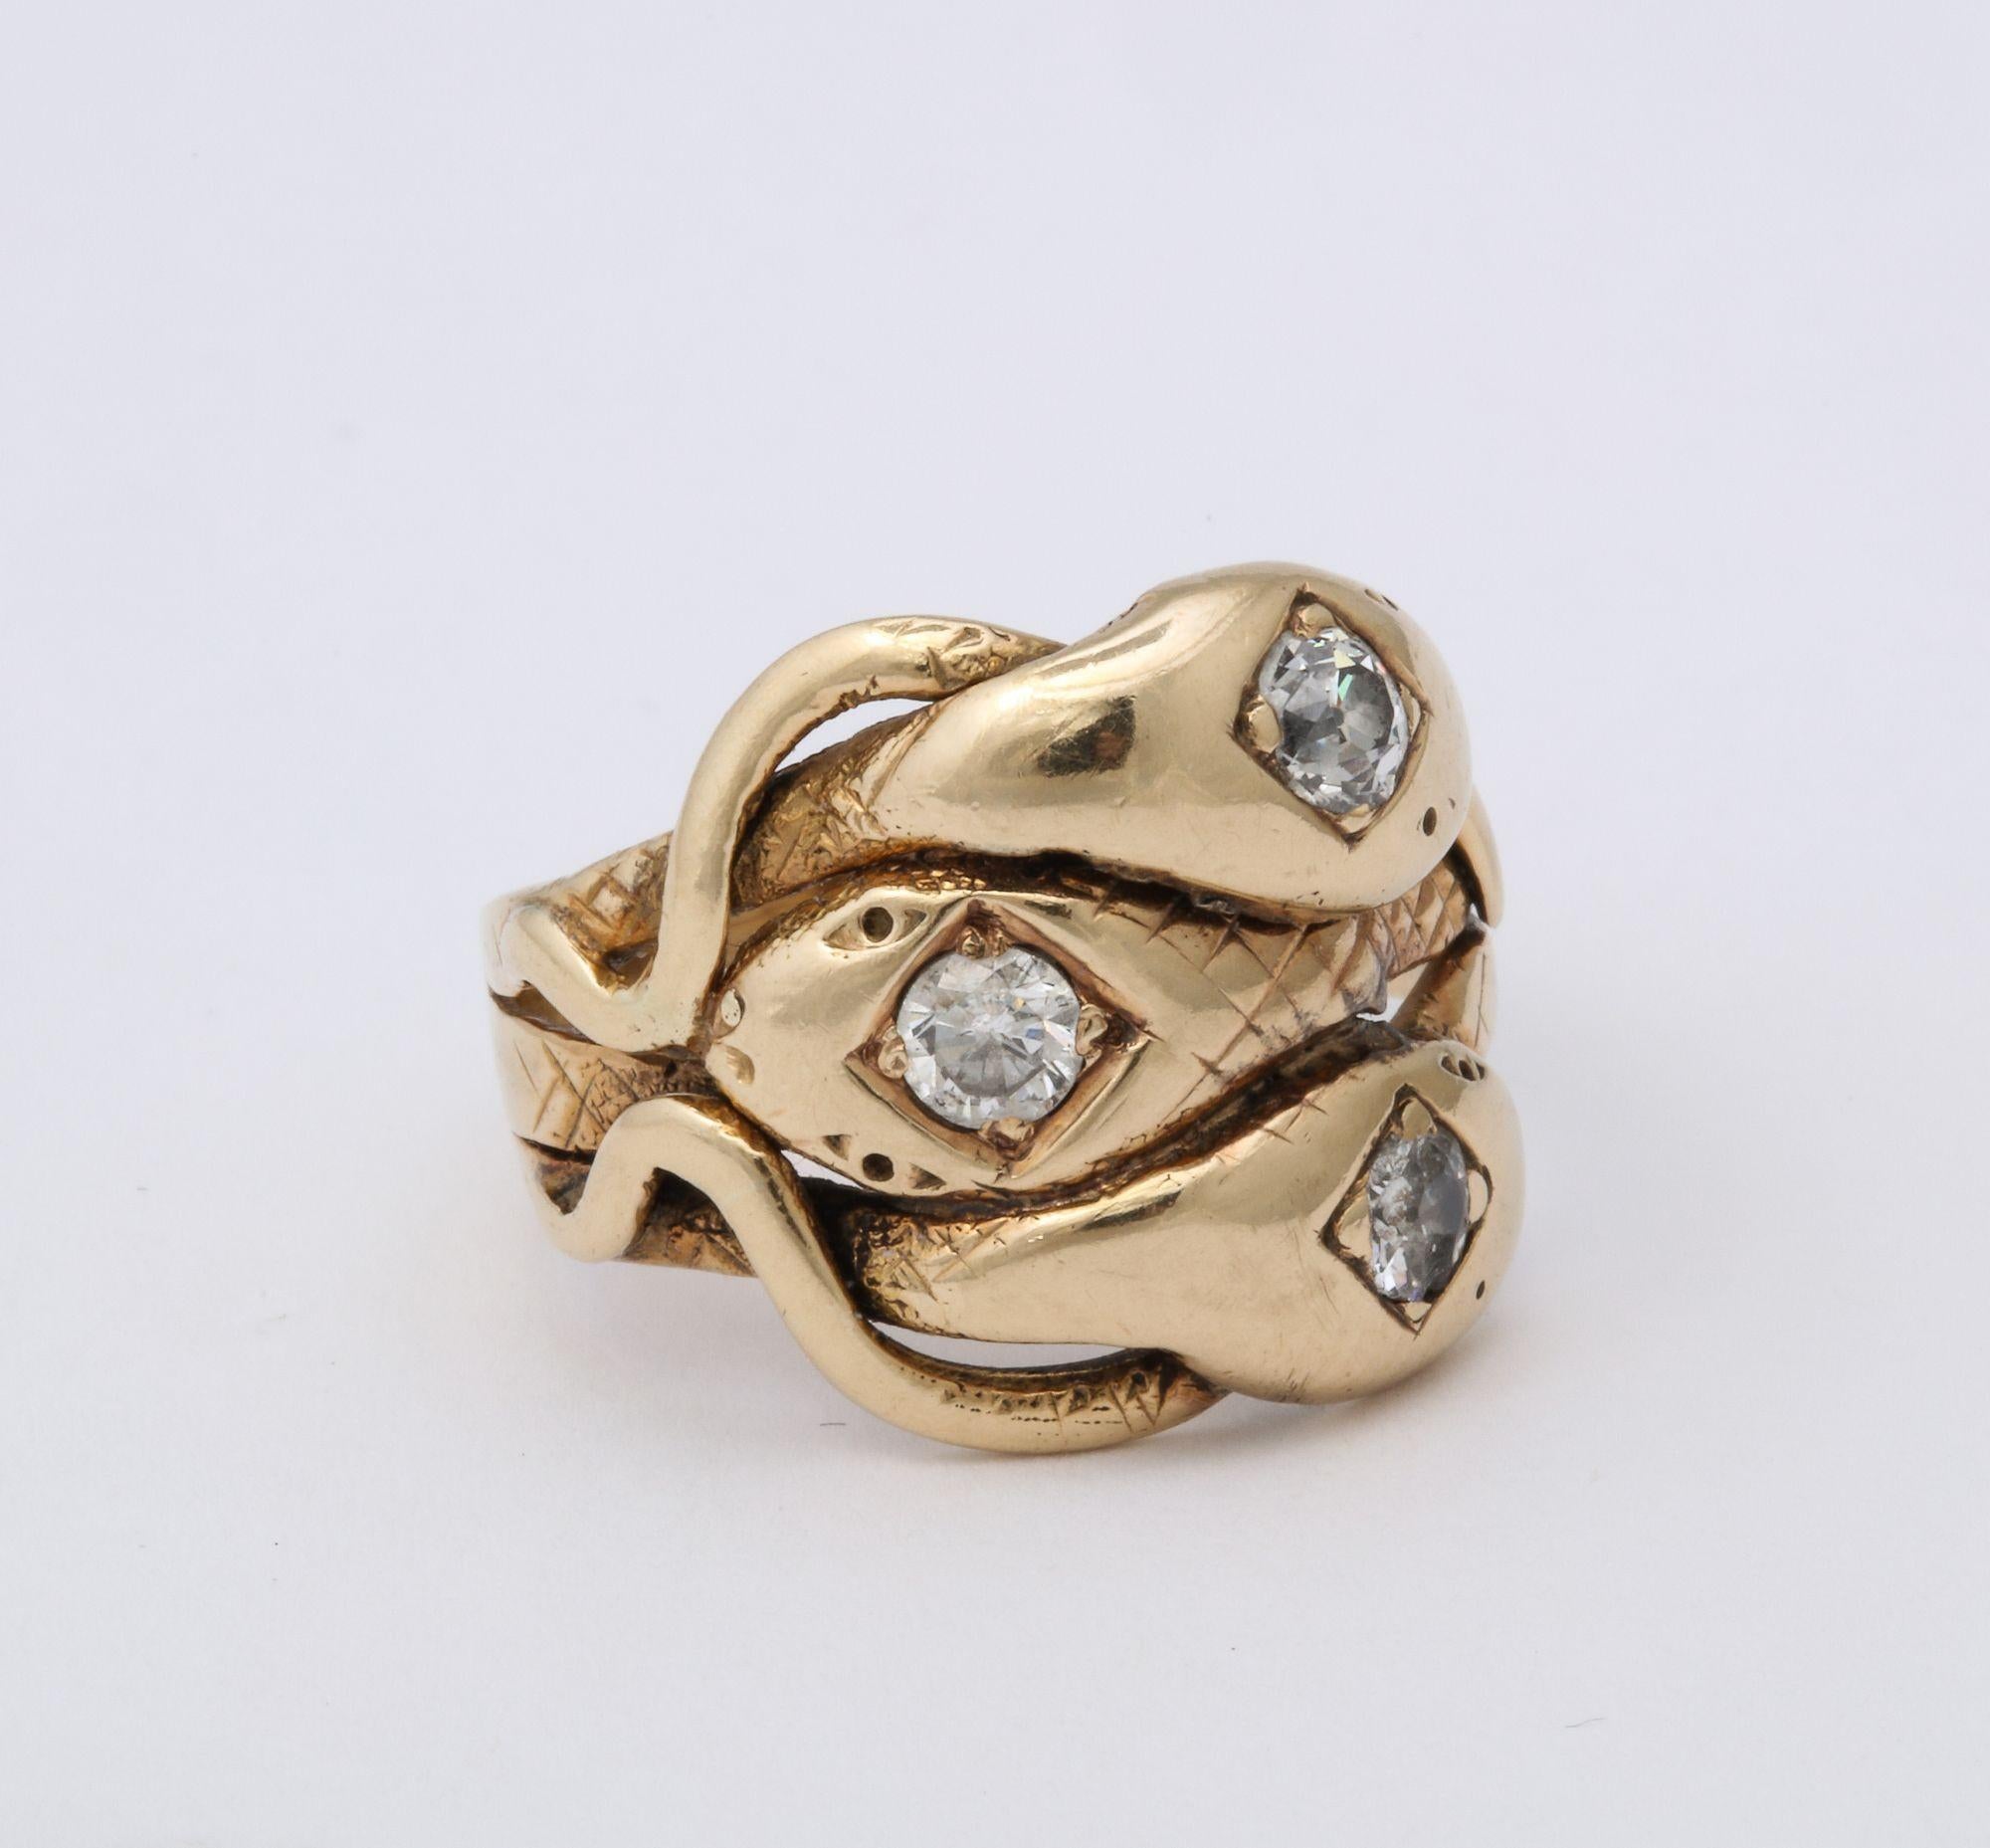 A unique Antique Diamond and Gold Three Headed Snake Ring. Three intertwined snakes with Old European cut diamonds inset into the heads wrap around the finger. A rare ring that is a real find.